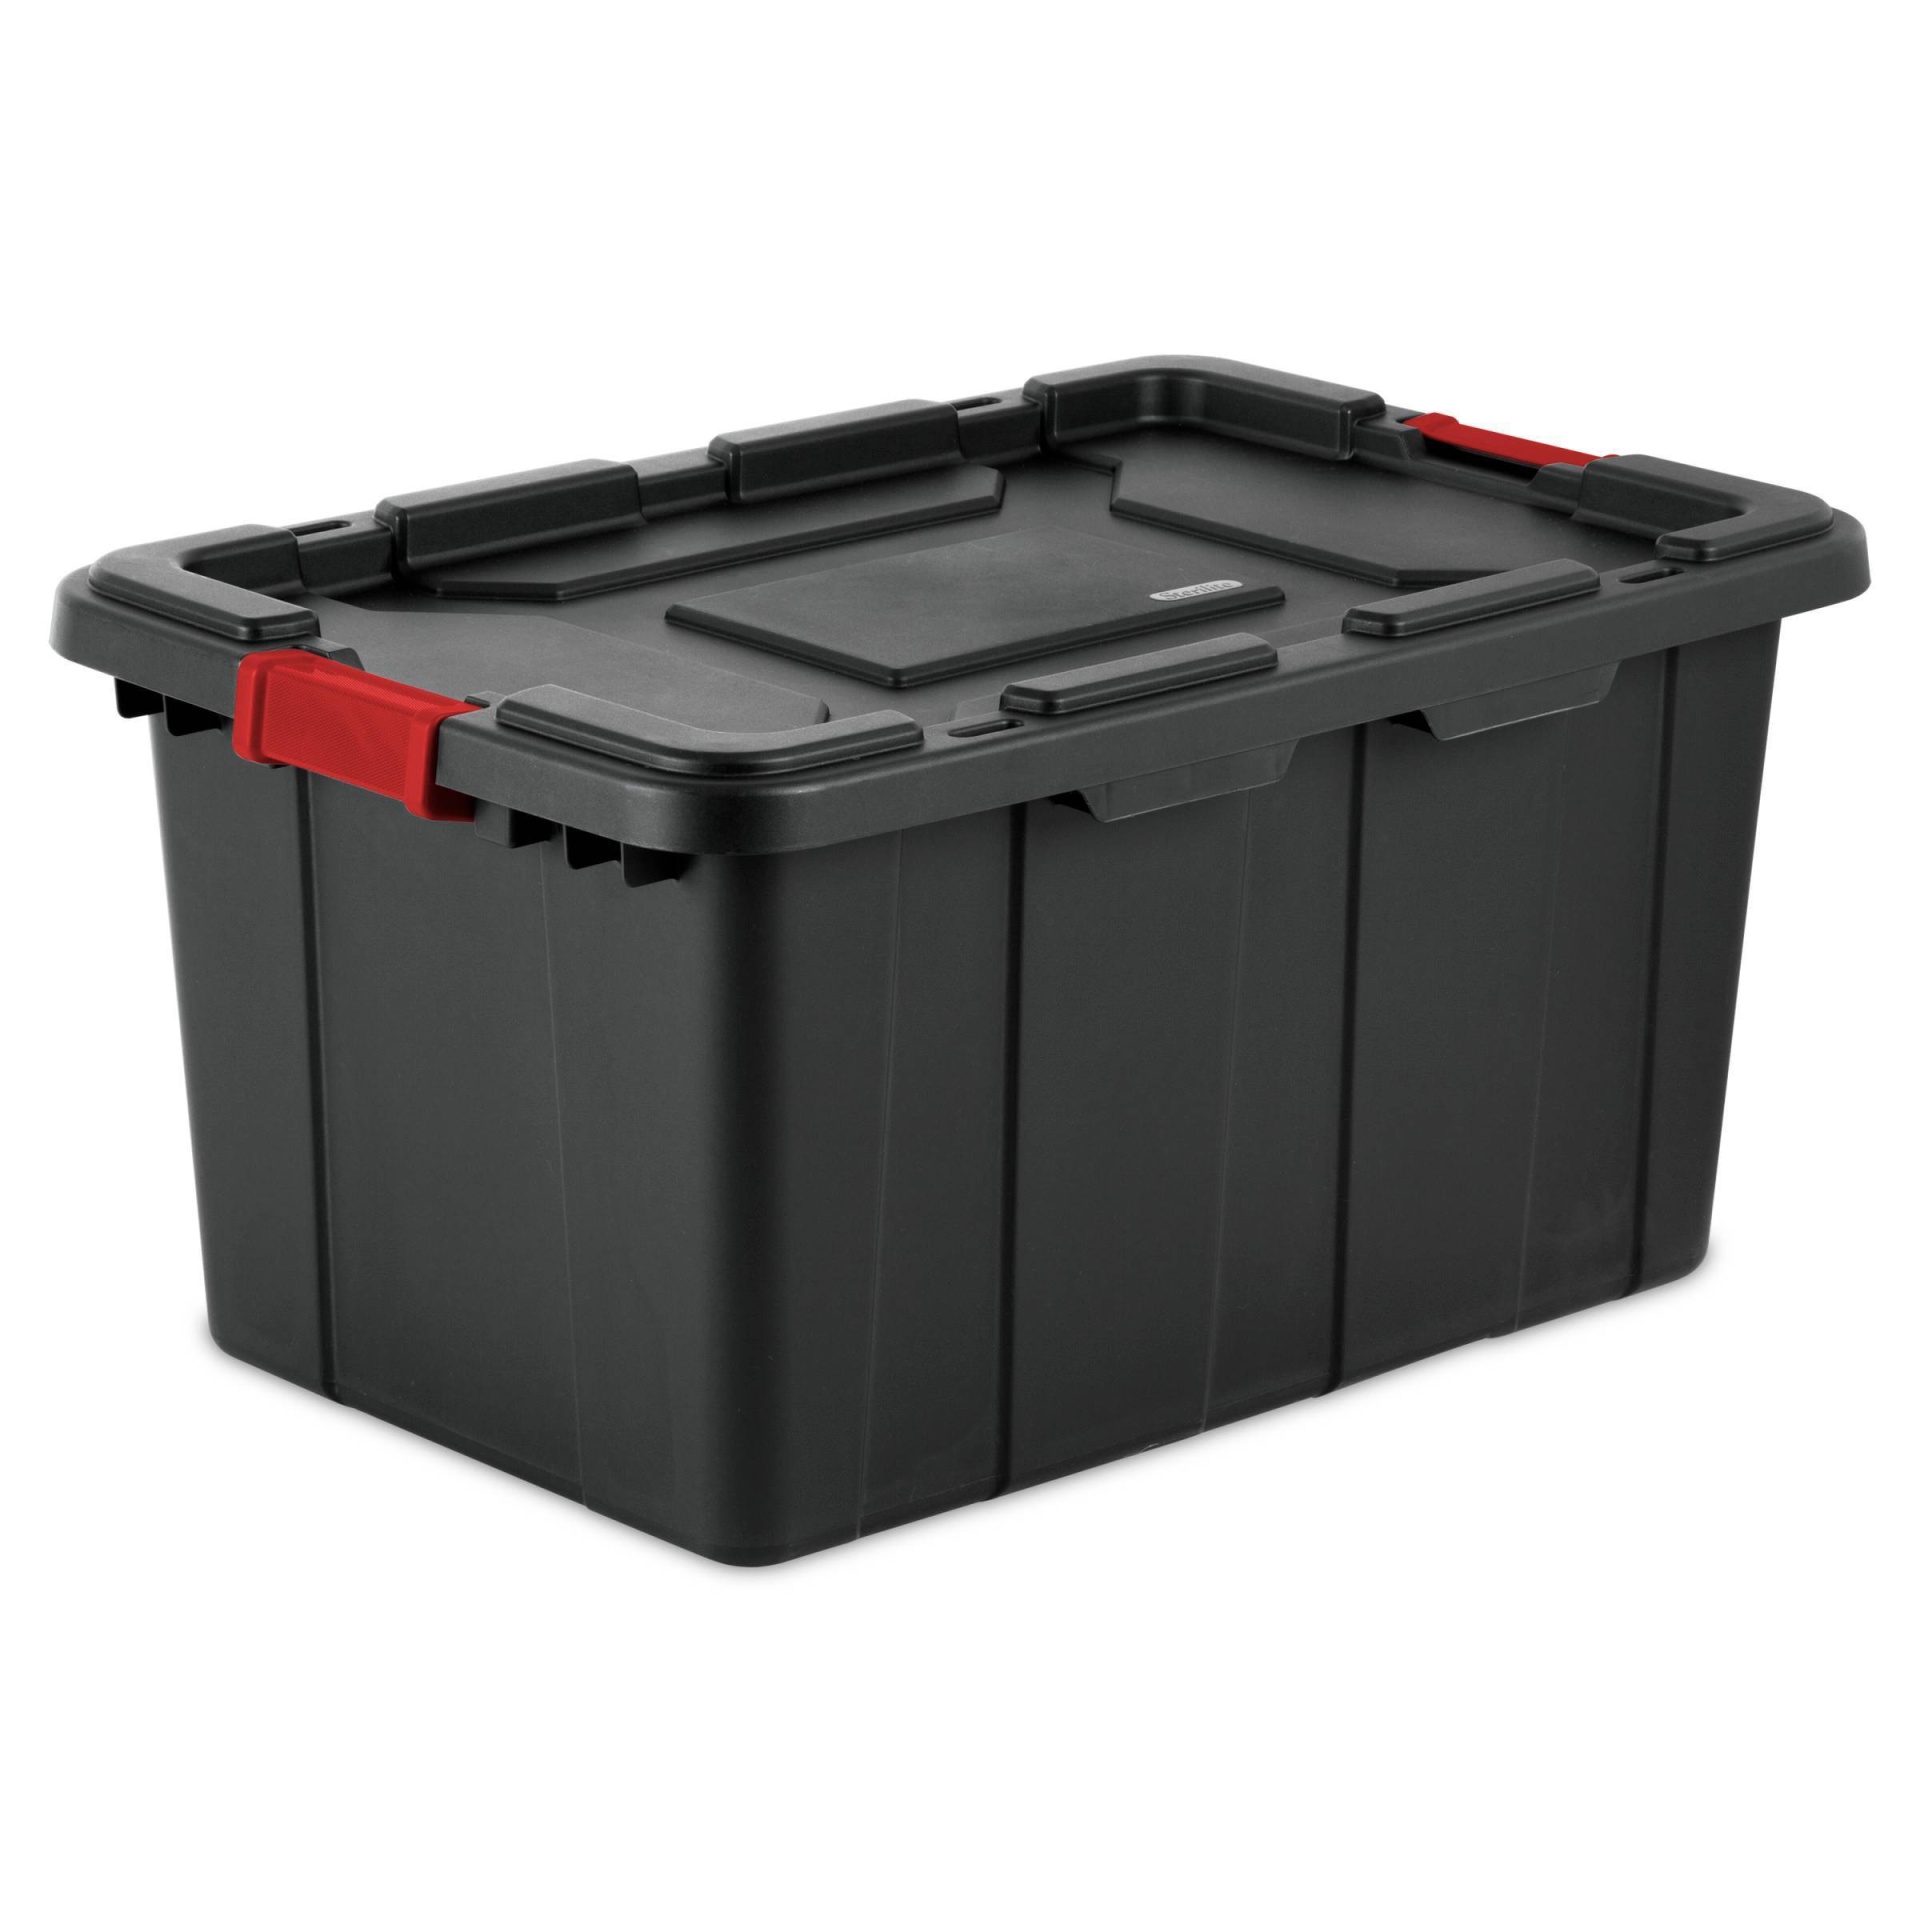 slide 1 of 1, Sterilite Industrial Utility Storage Tote - Black With Red Latch, 108 qt